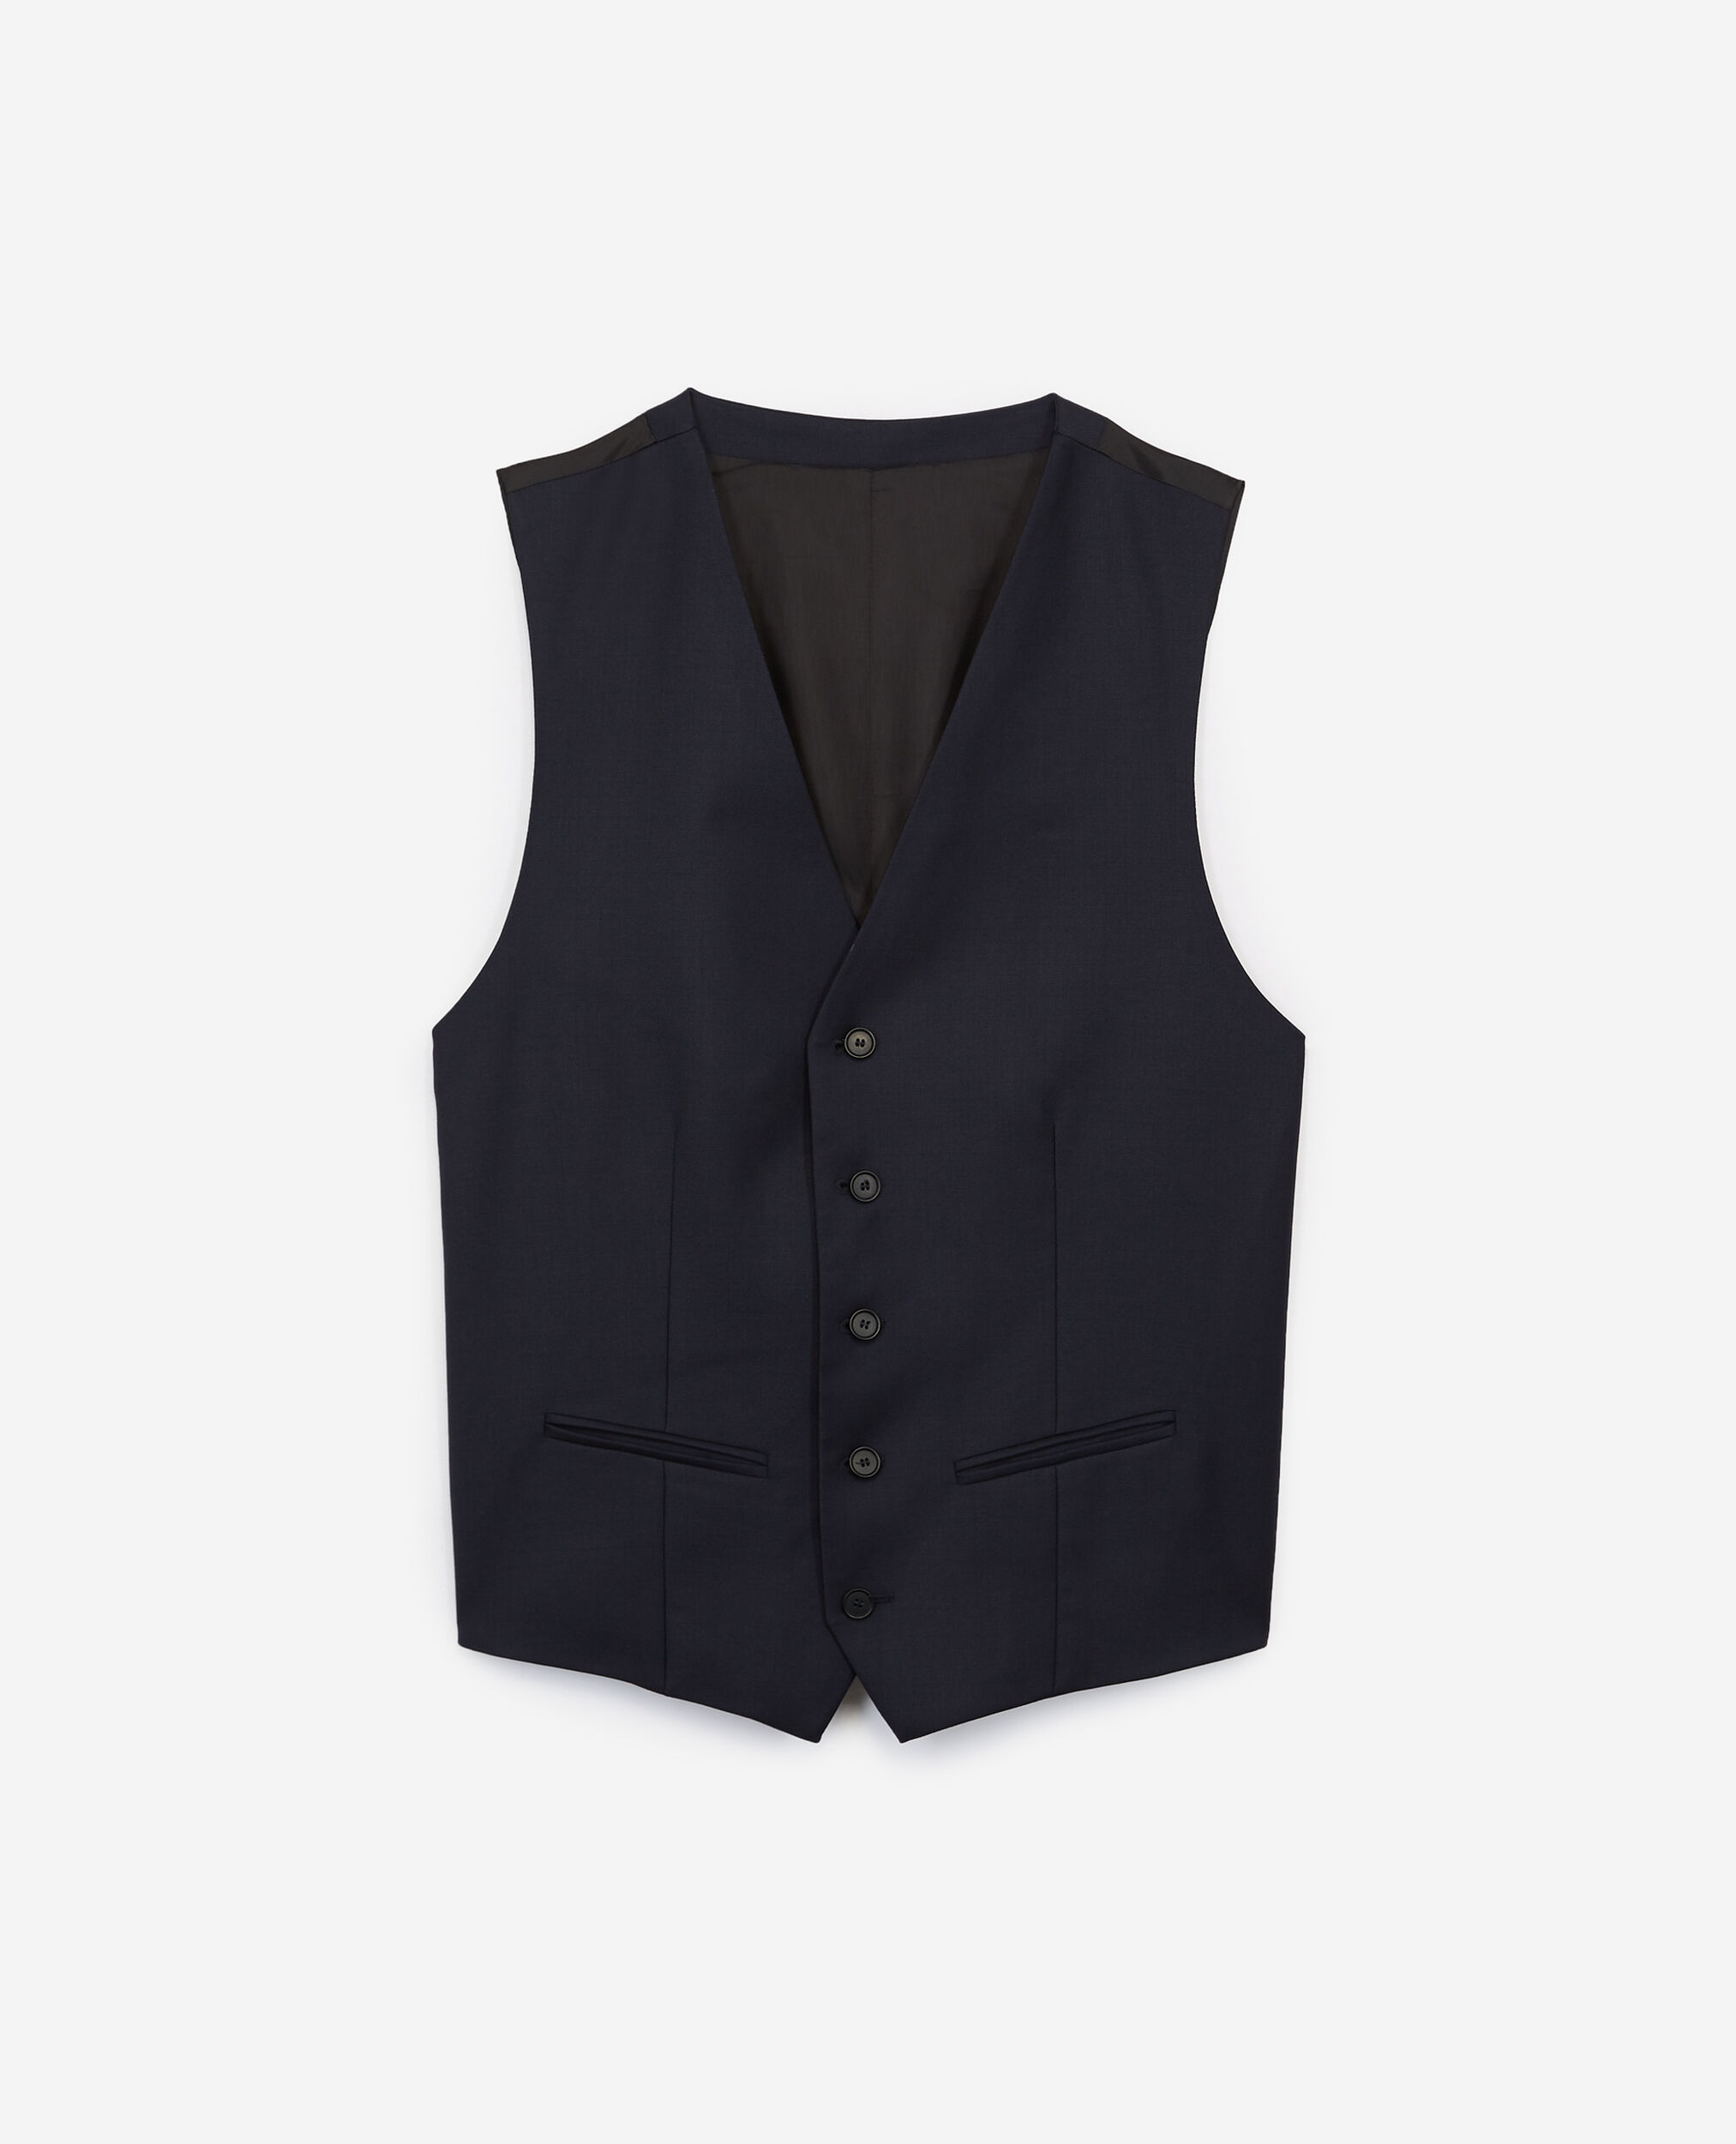 Buttoned navy blue waistcoat in wool, DARK NAVY, hi-res image number null